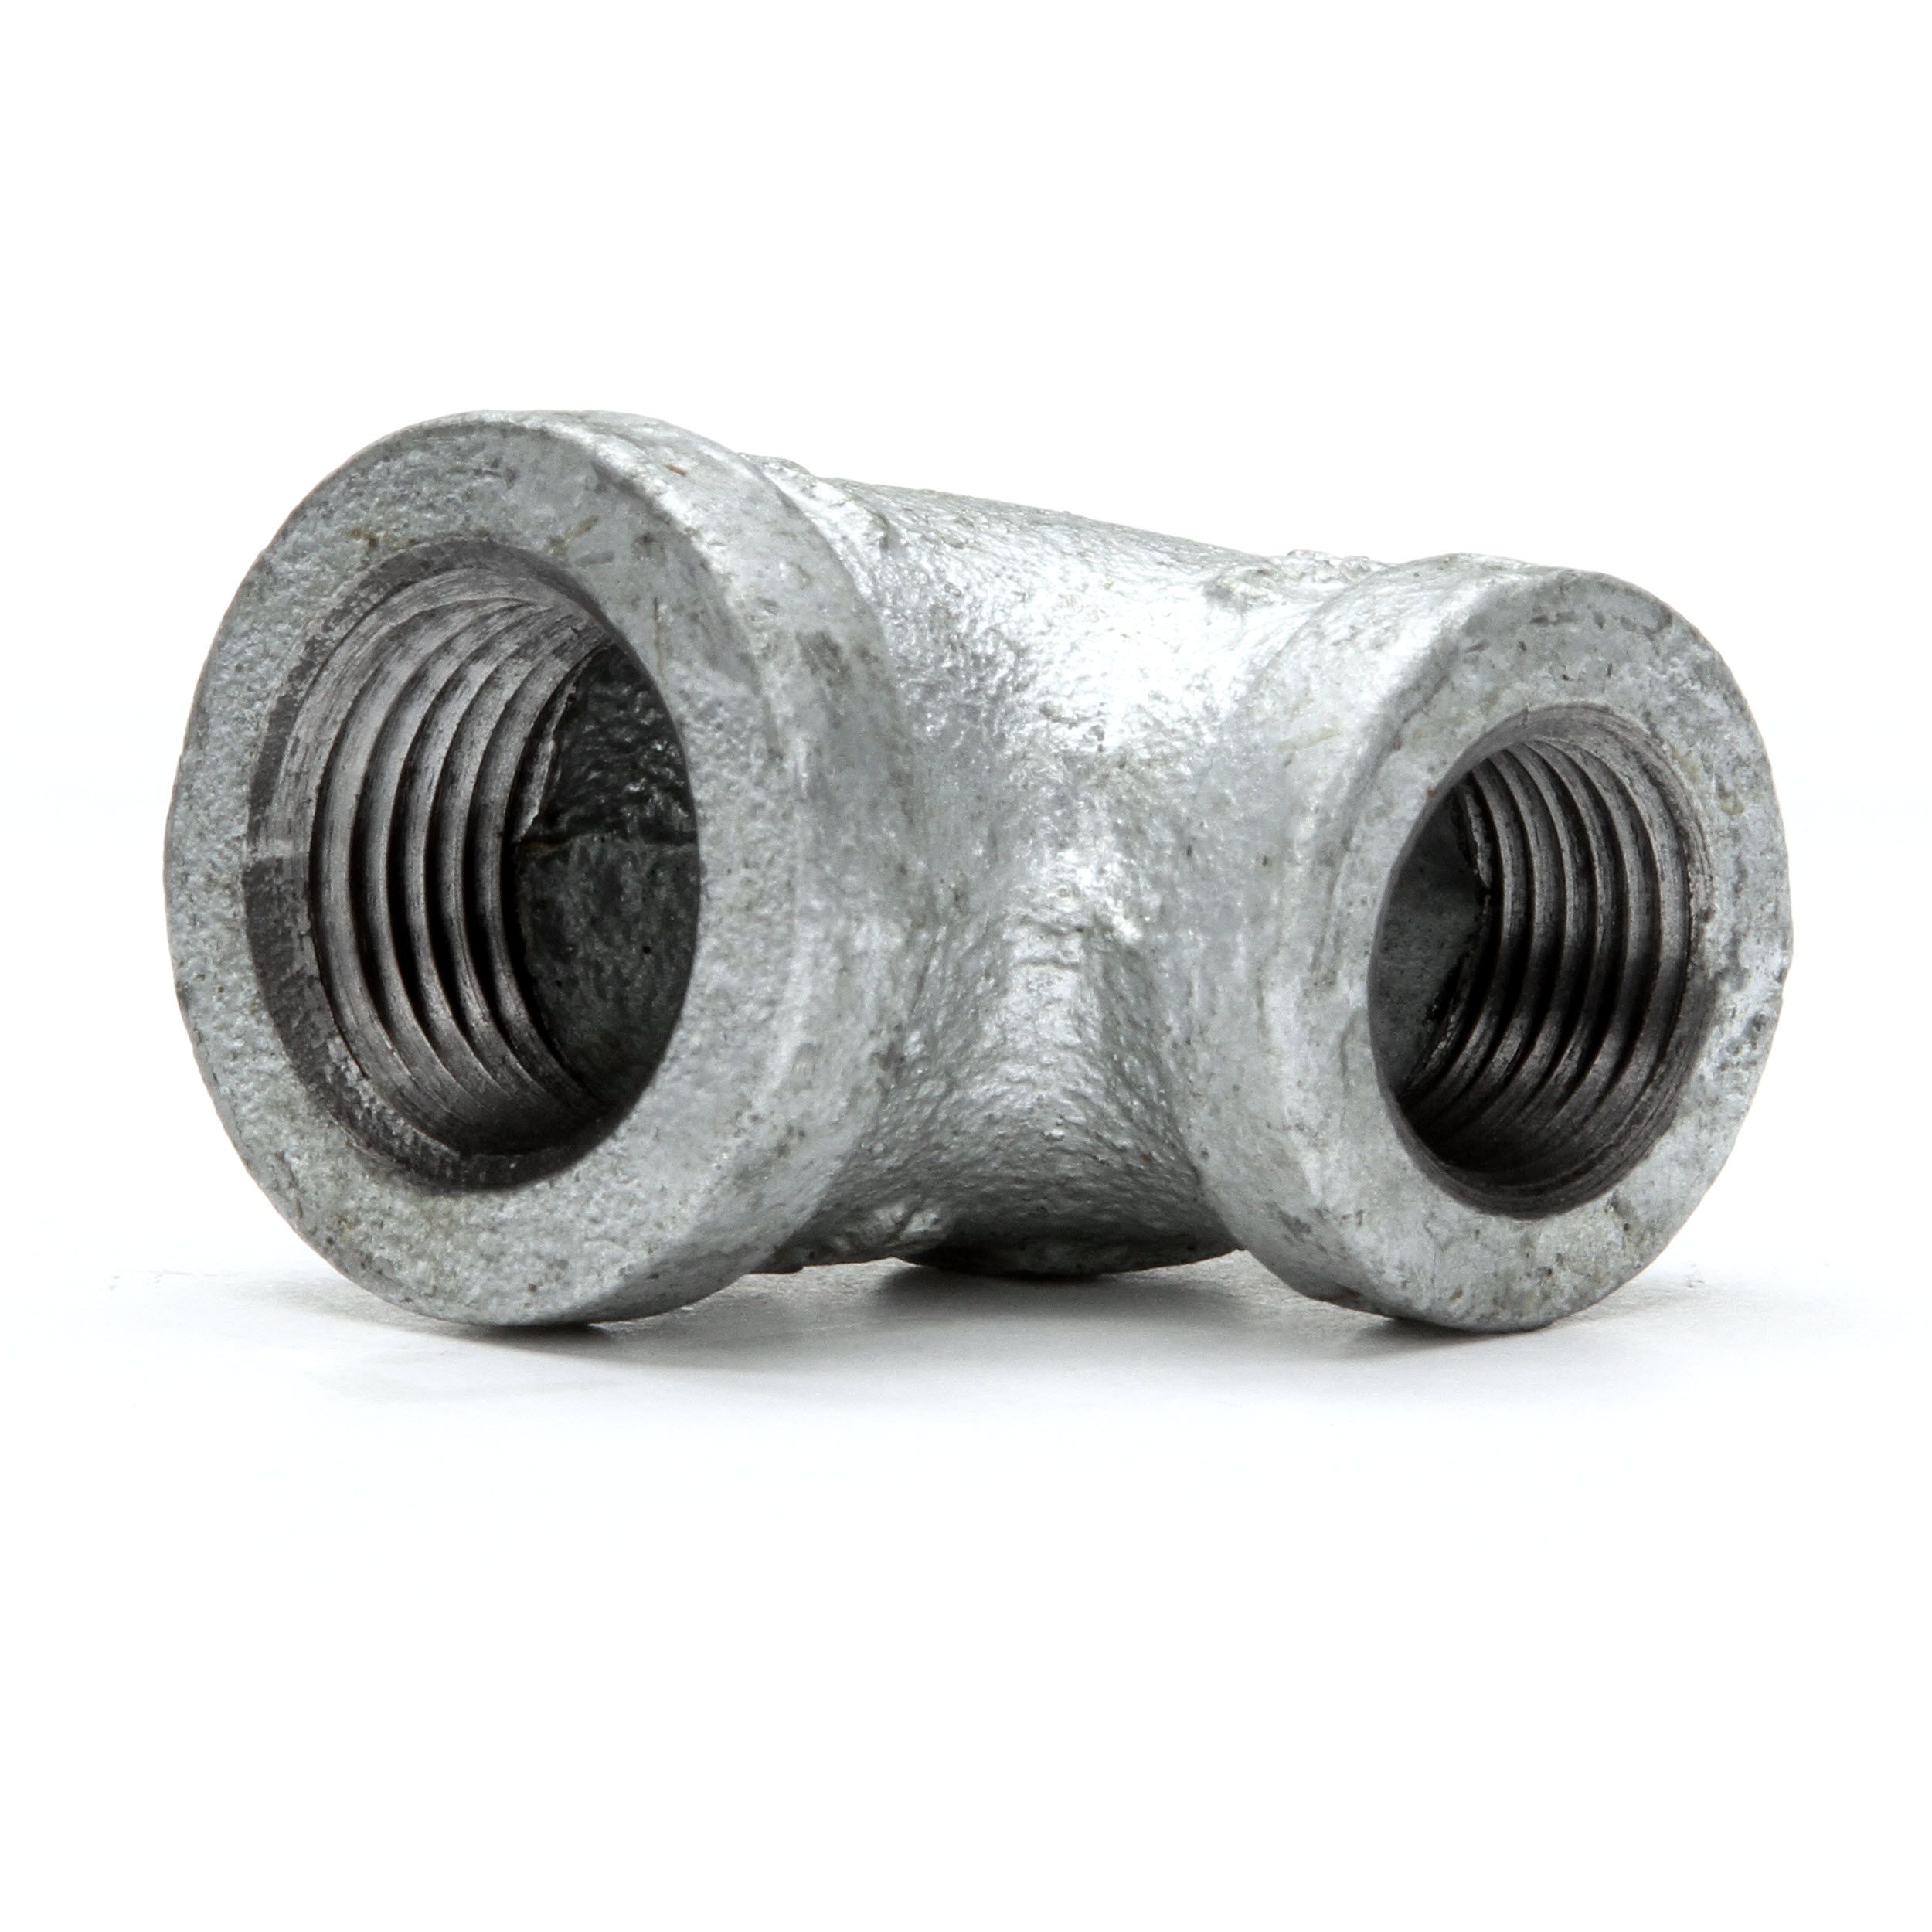 Details about   40480 Pipe Elbow 